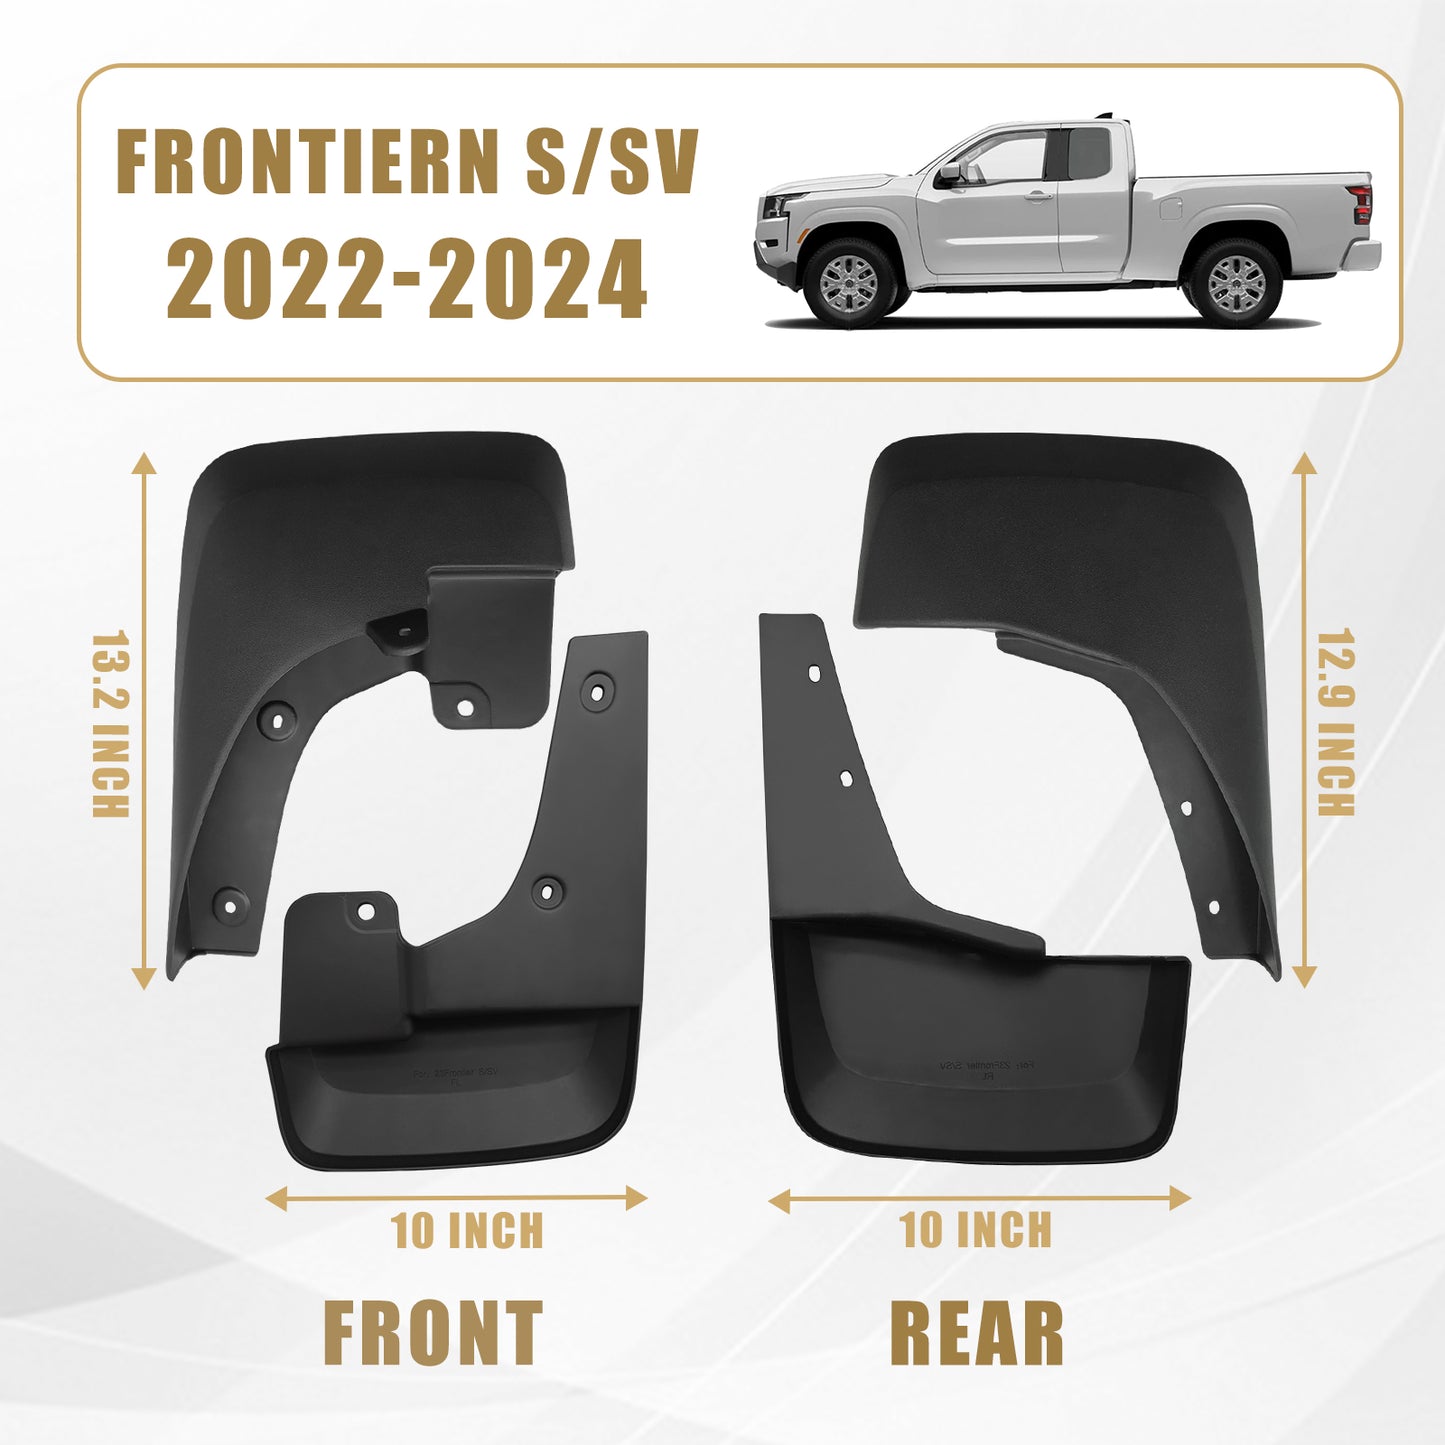 【Presale】Mud Flaps for Nissan Frontier 2022-2024 [ S/SV ]